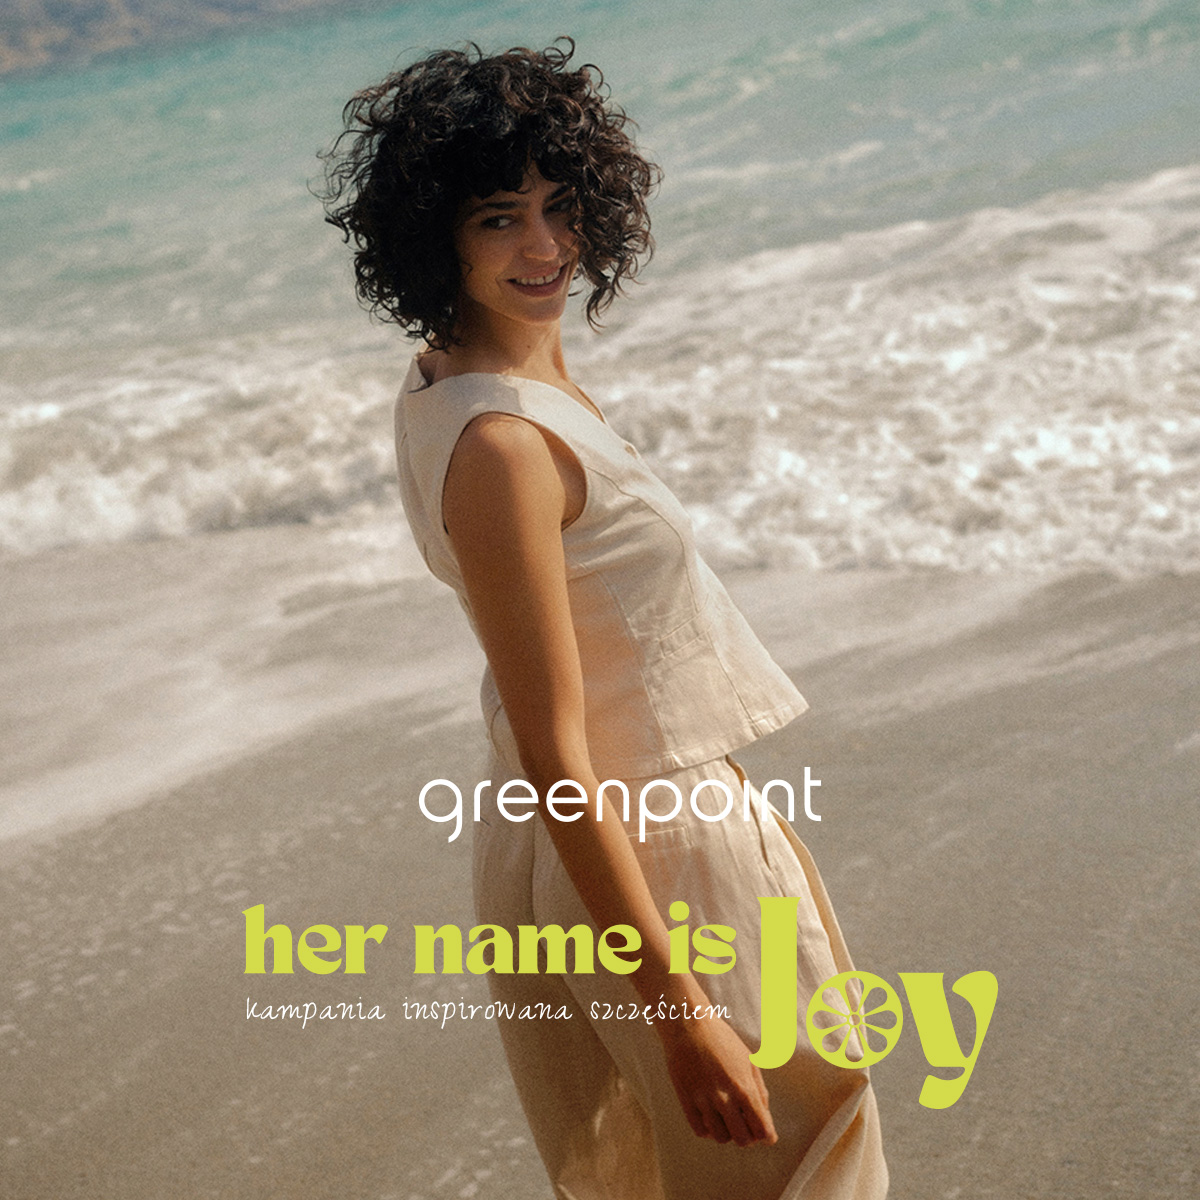 GREENPOINT: Her name is Joy